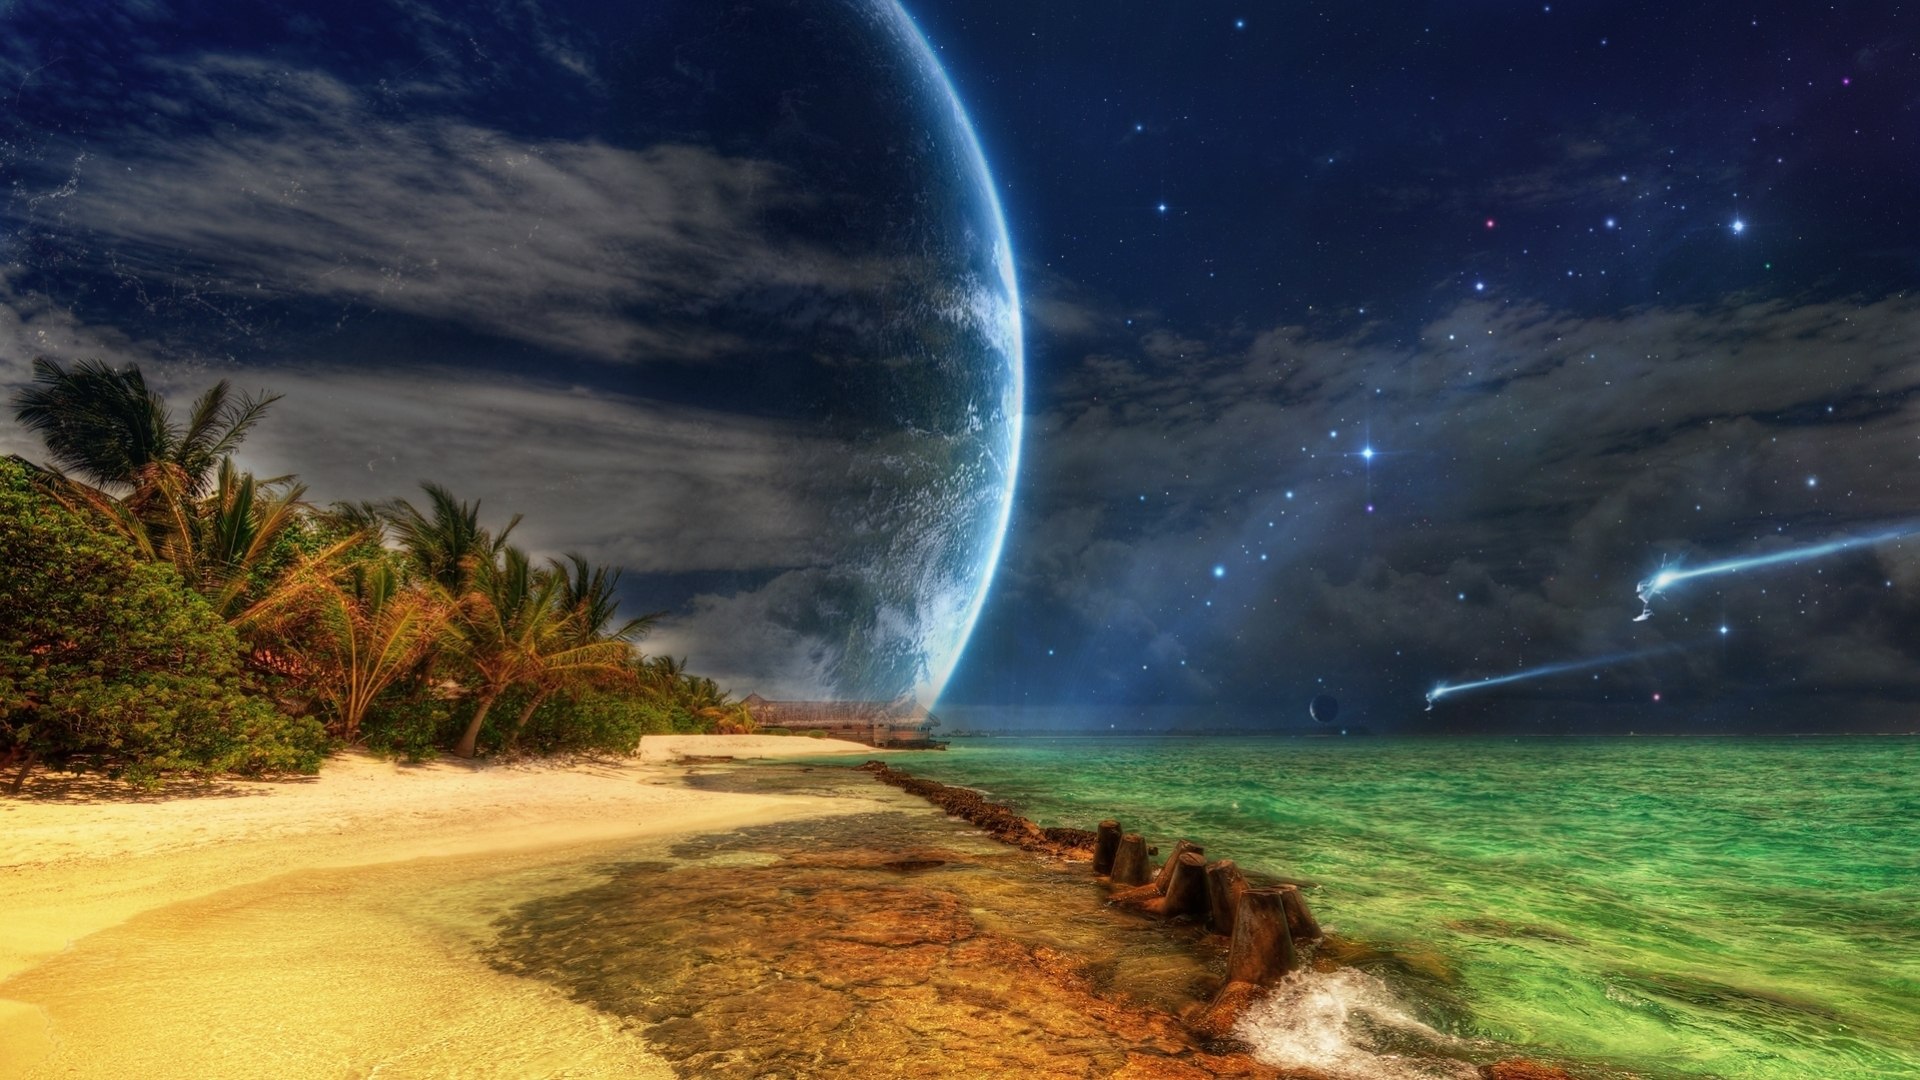 Space_Beach_on_another_planet_095025_.jpg